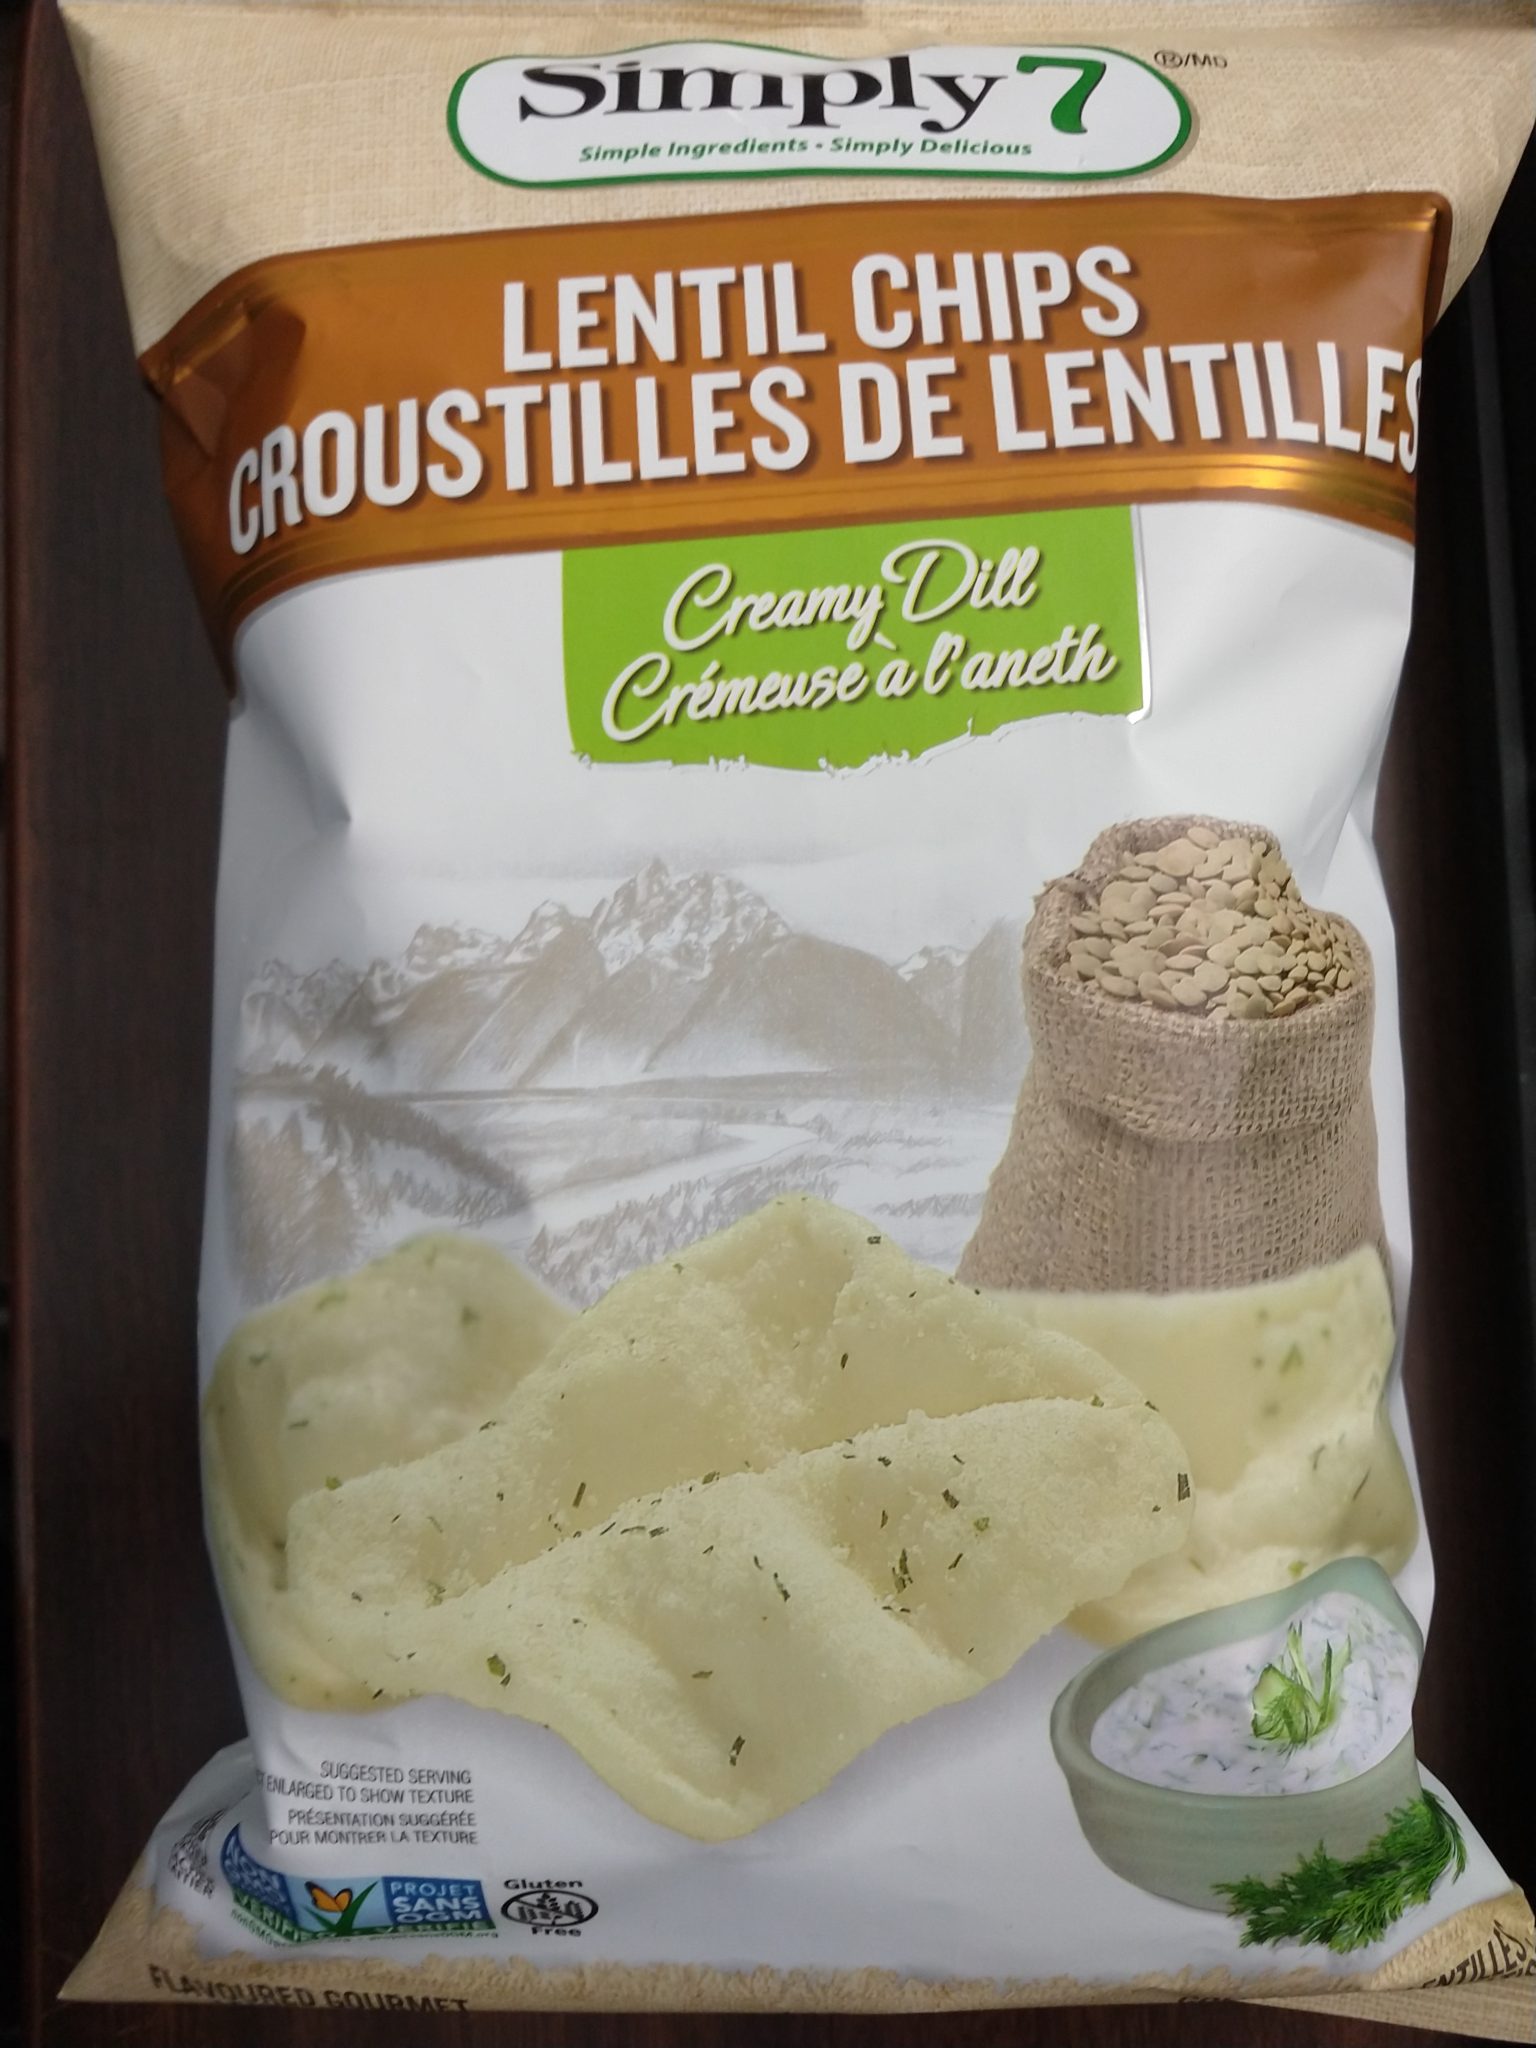 Simply 7 Lentil Chips – Creamy Dill